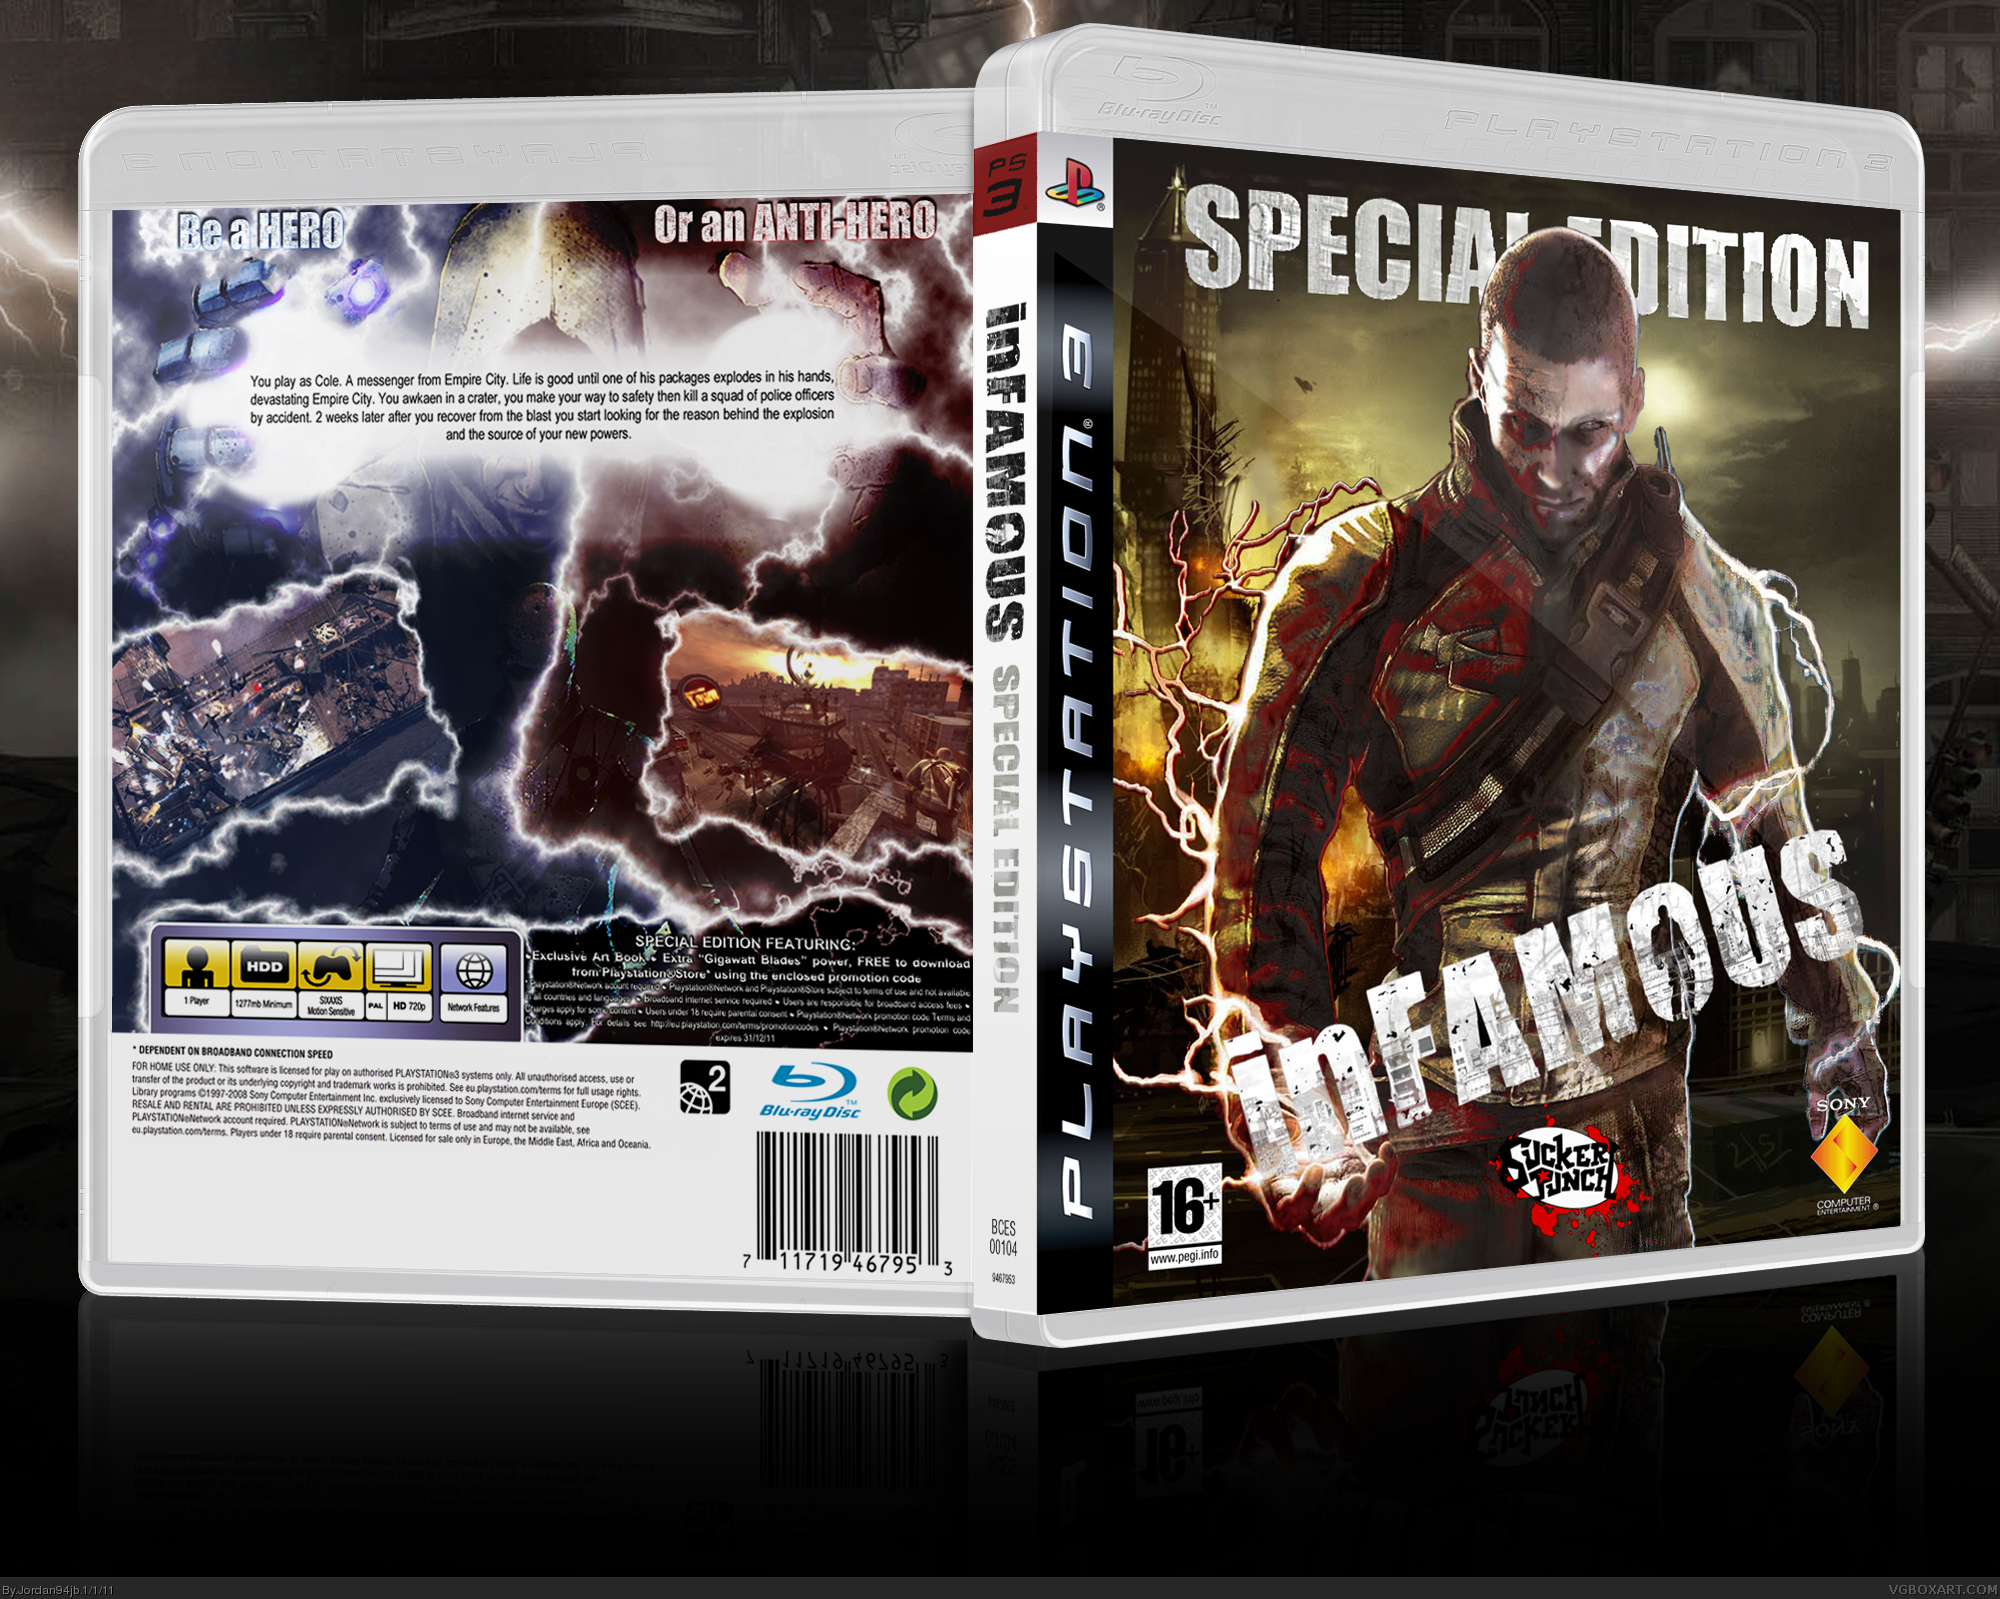 inFAMOUS: Special Edition box cover